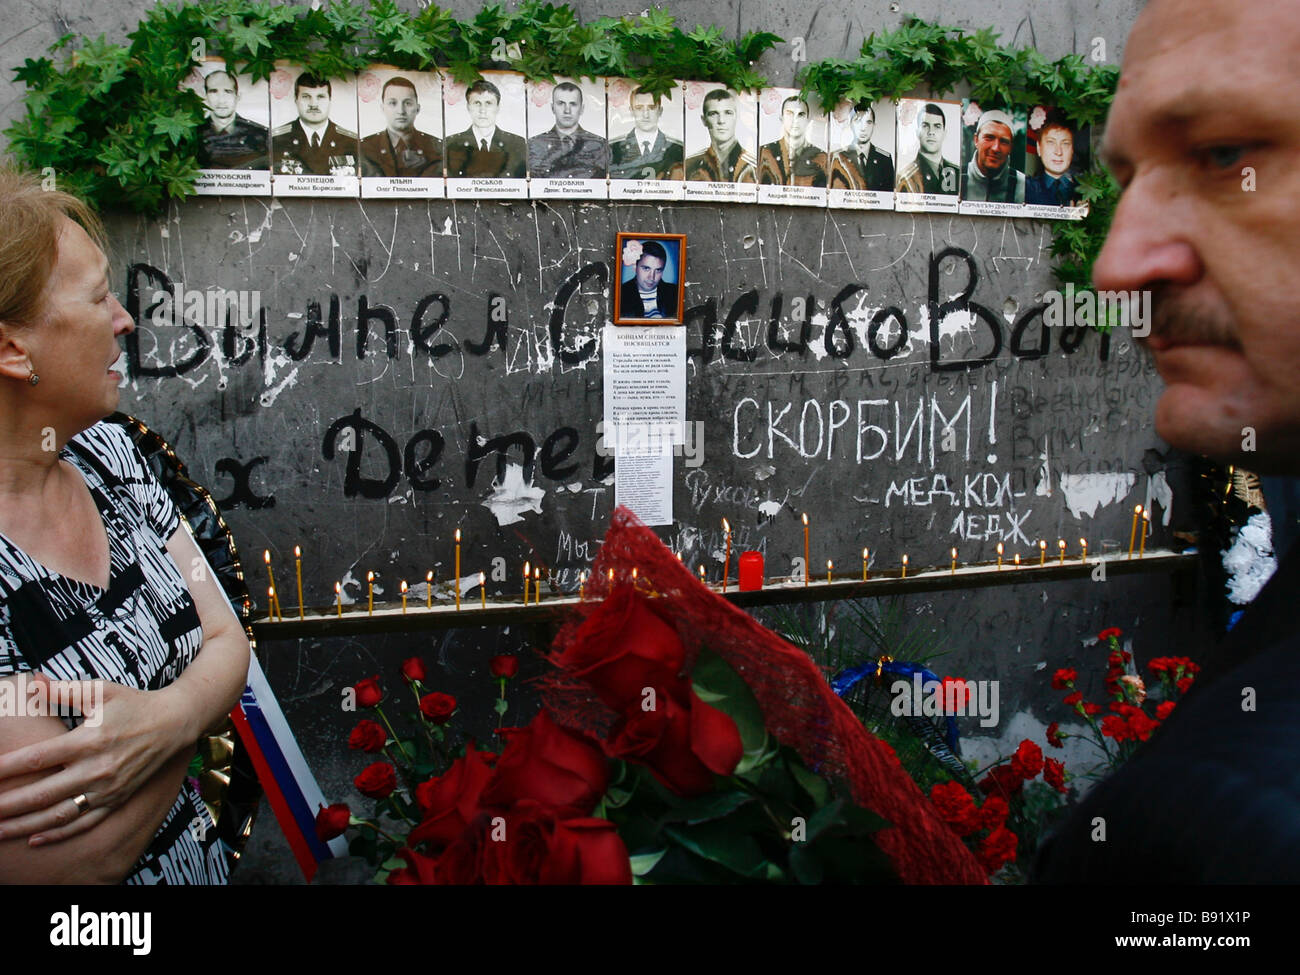 A memorial service held in Beslan for the 333 victims of the Beslan school hostage taking on September 1 2004 Stock Photo